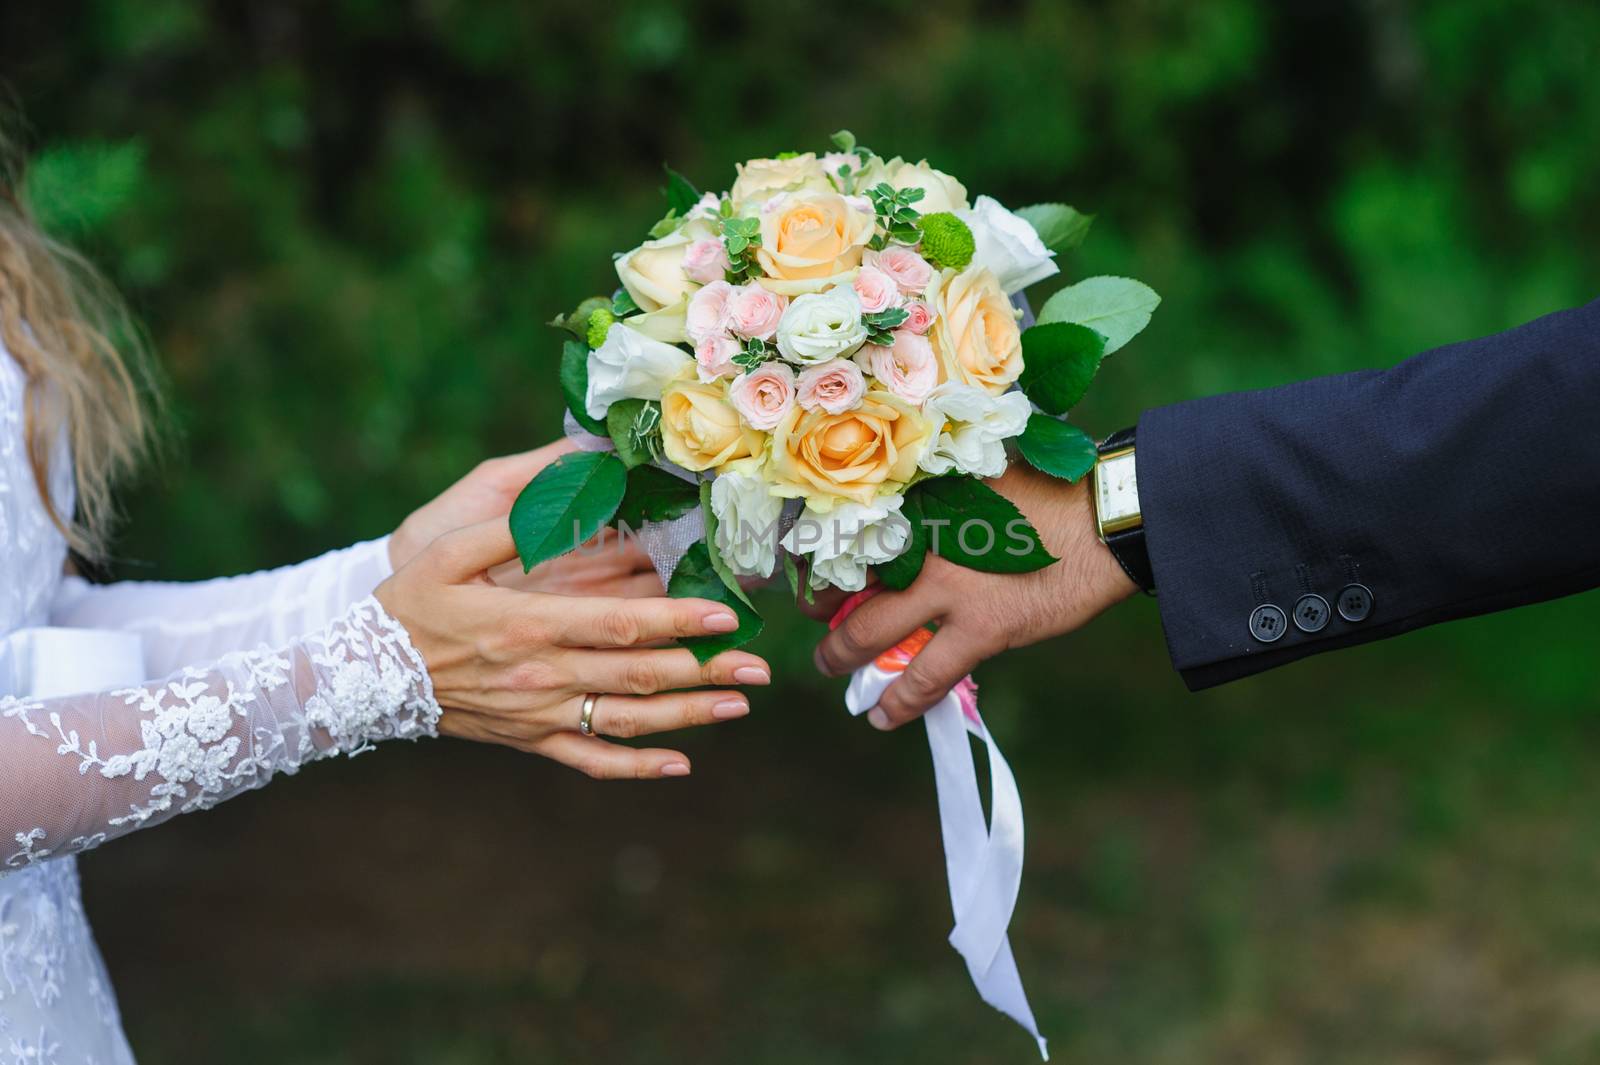 Groom gives bride a wedding bouquet in summer park by timonko